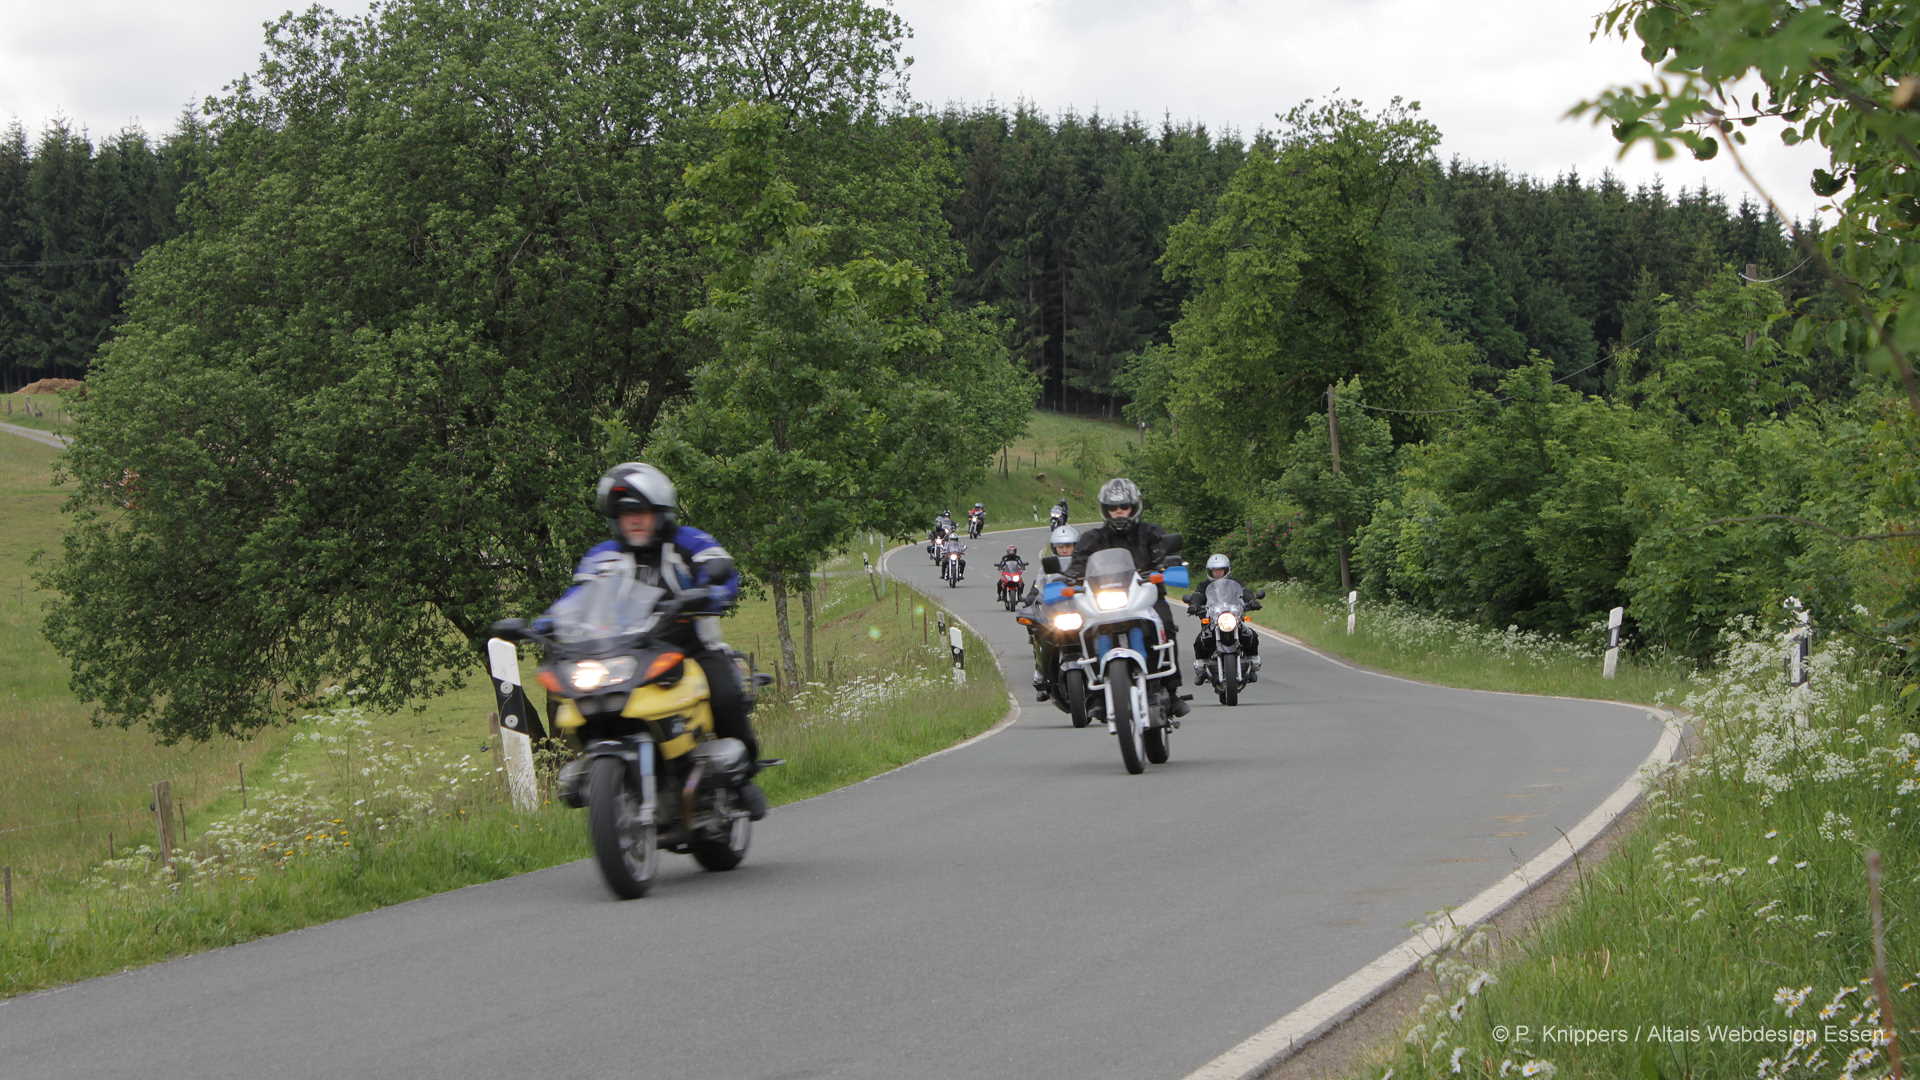 Motorbikes on the L29 near Faulebutter | © P. Knippers / Altais Webdesign Essen